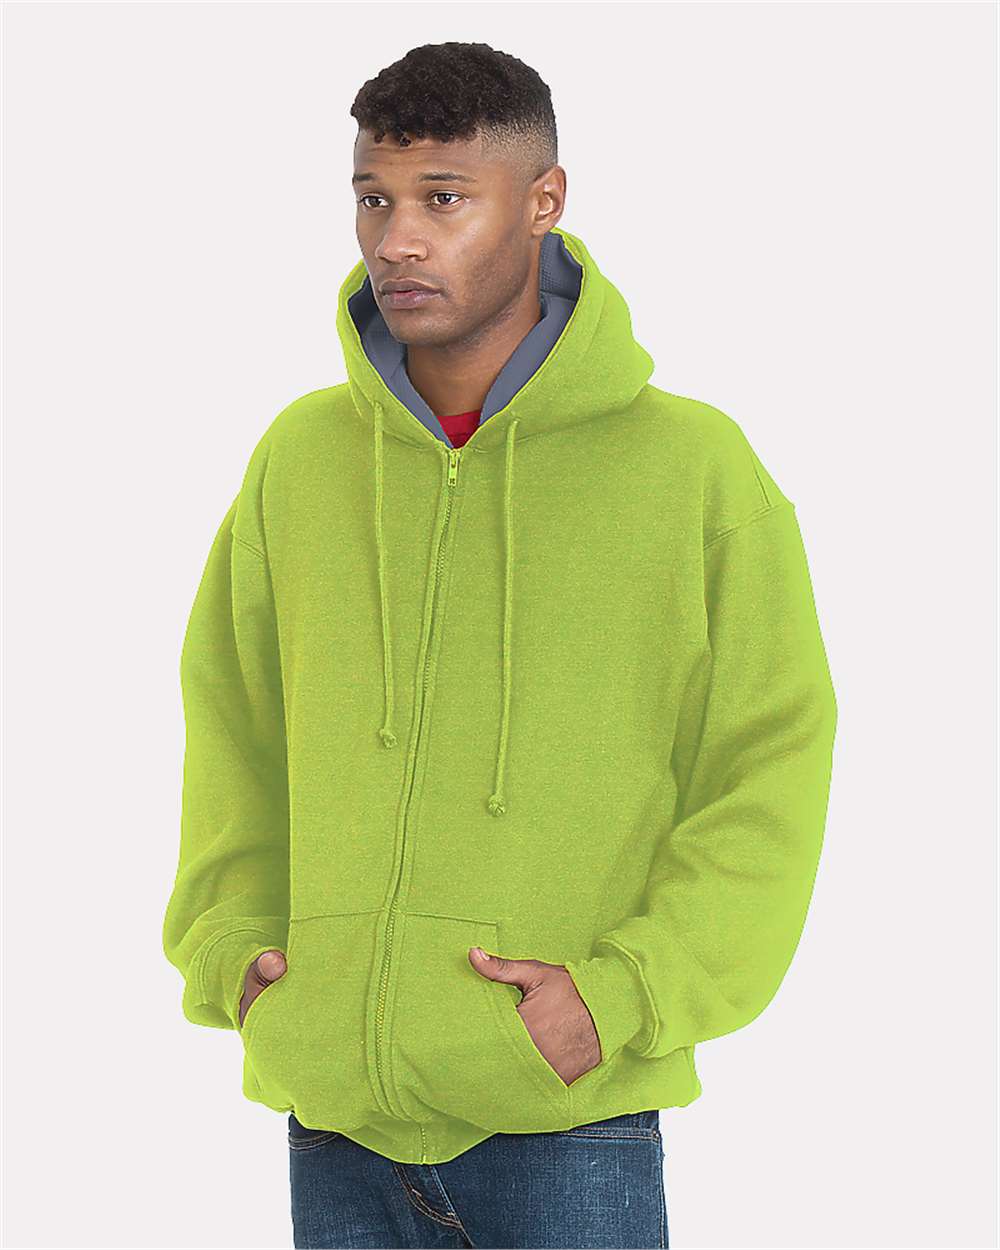 click to view Lime Green/ Dark Grey